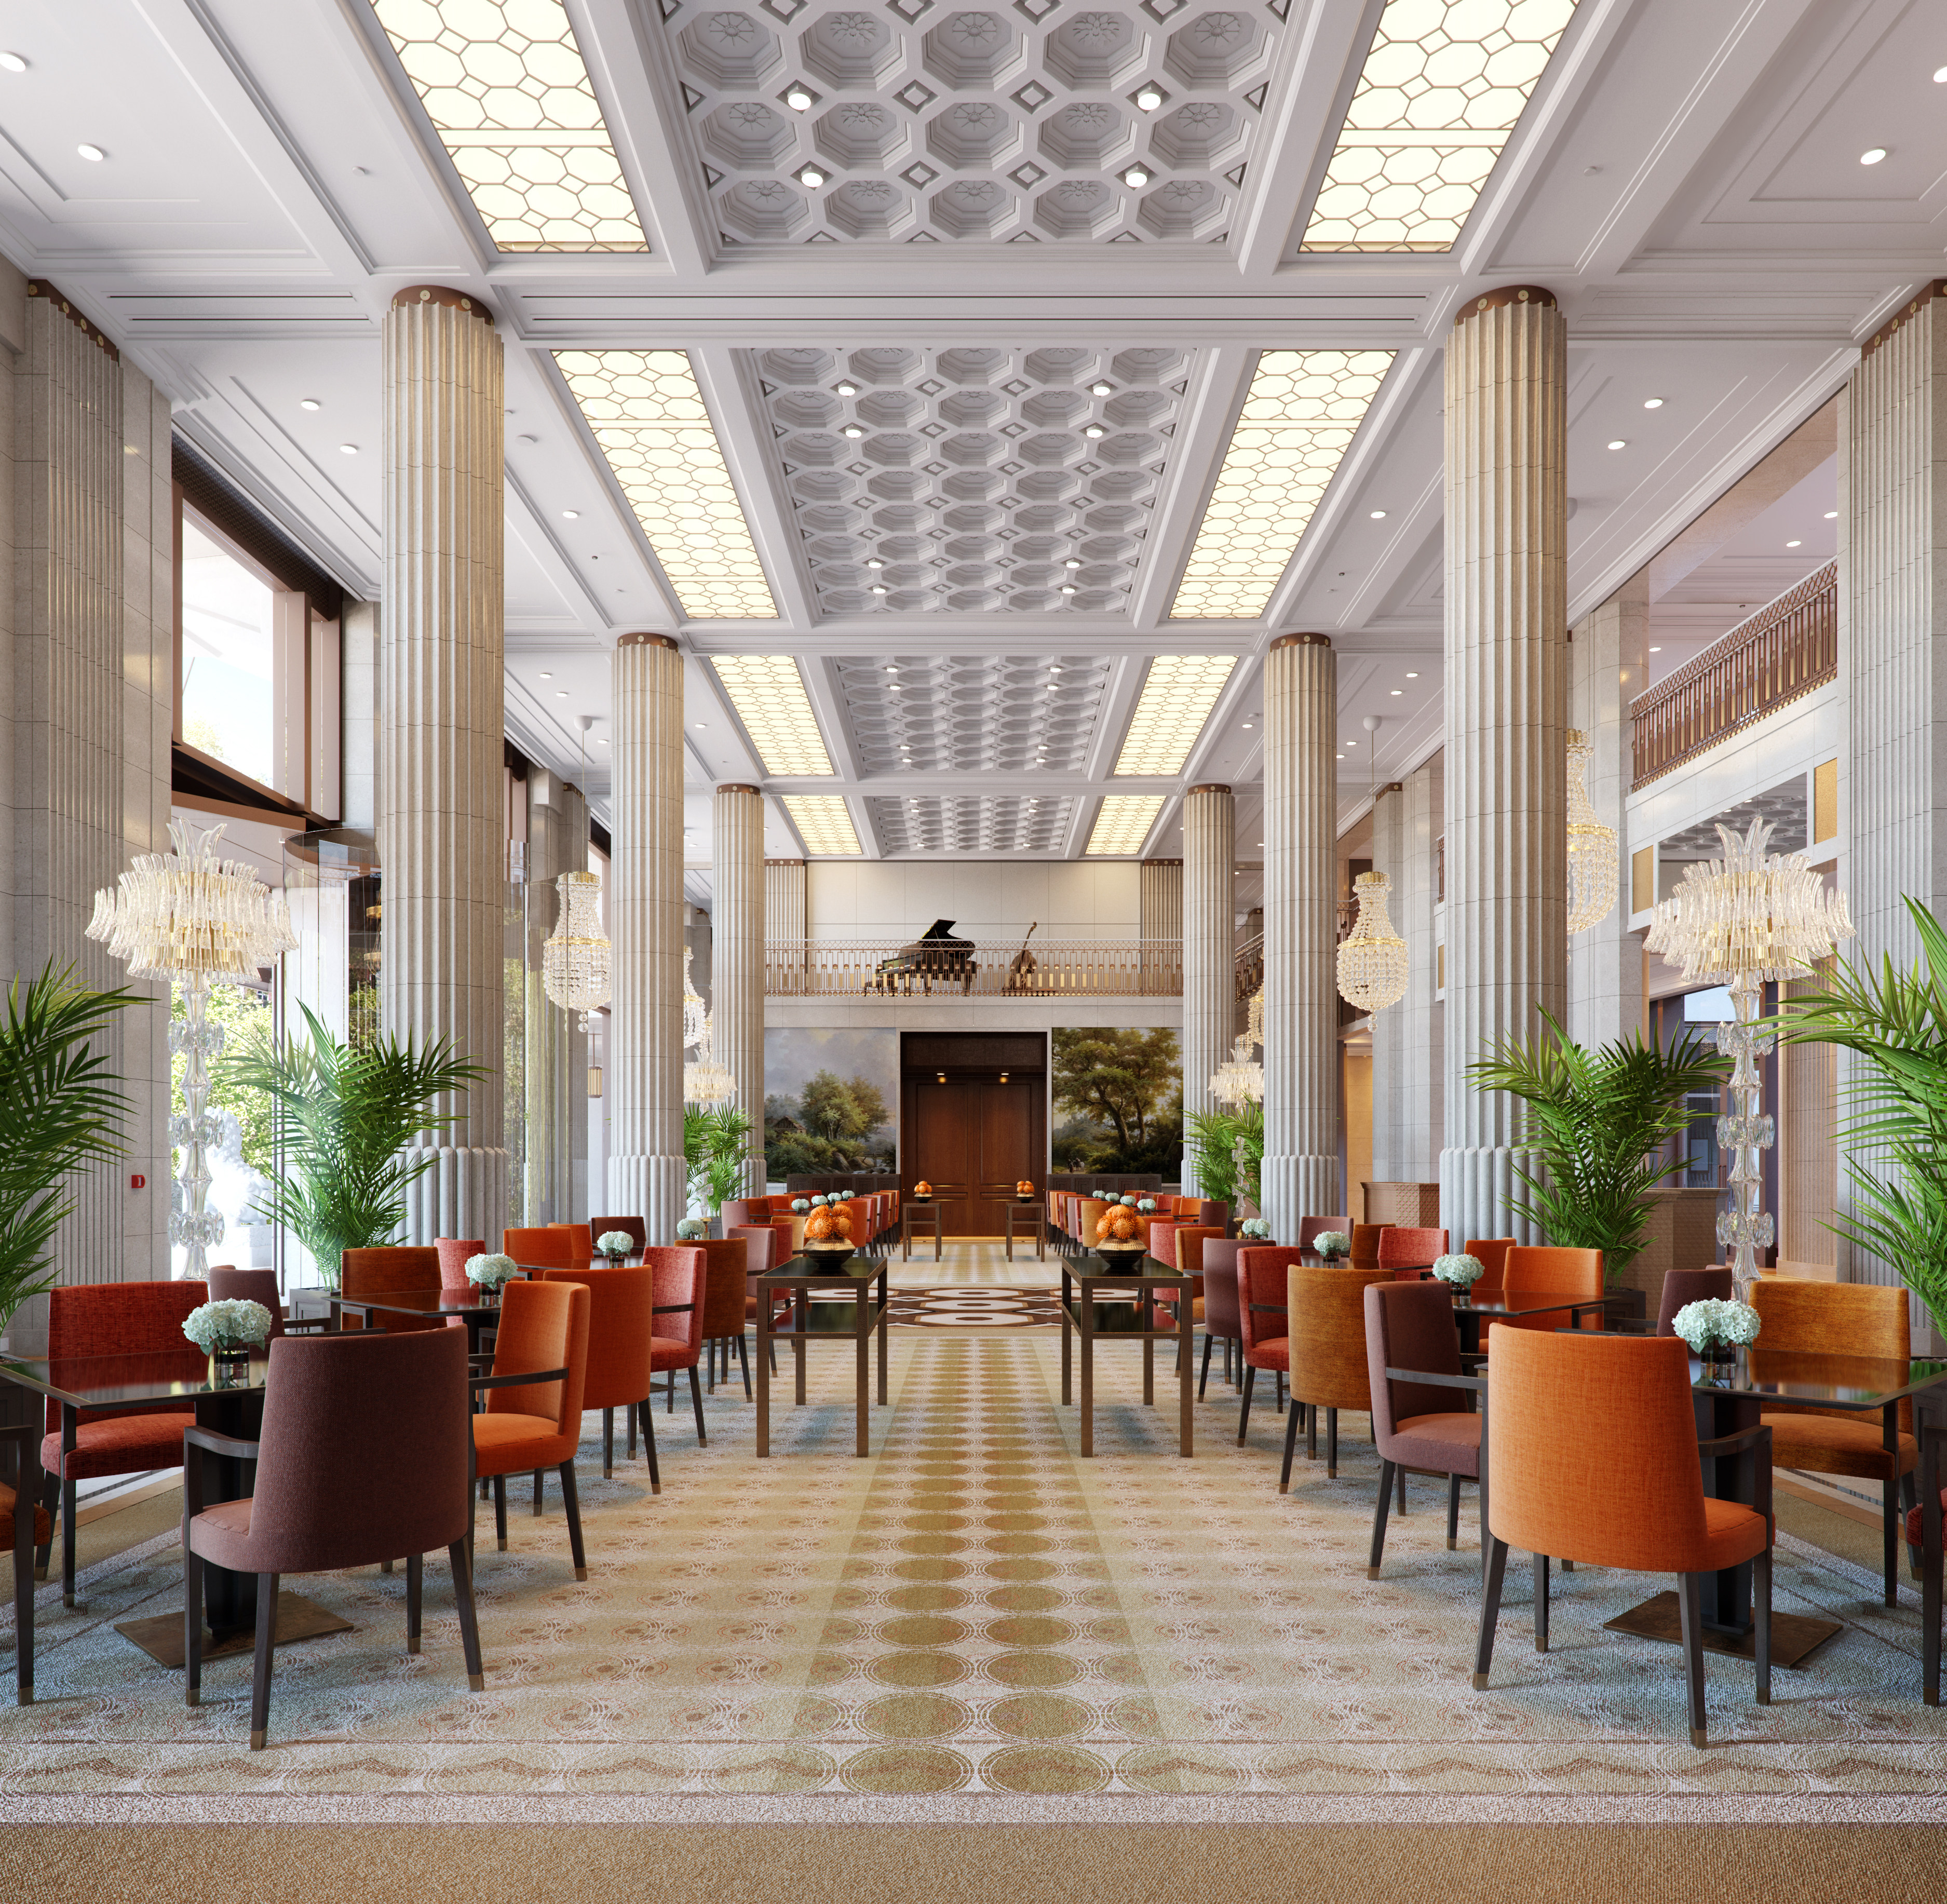 The Lobby at The Peninsula London is reminiscent of the Hong Kong flagship, with white columns and tables arranged for afternoon tea. Photo: The Peninsula London